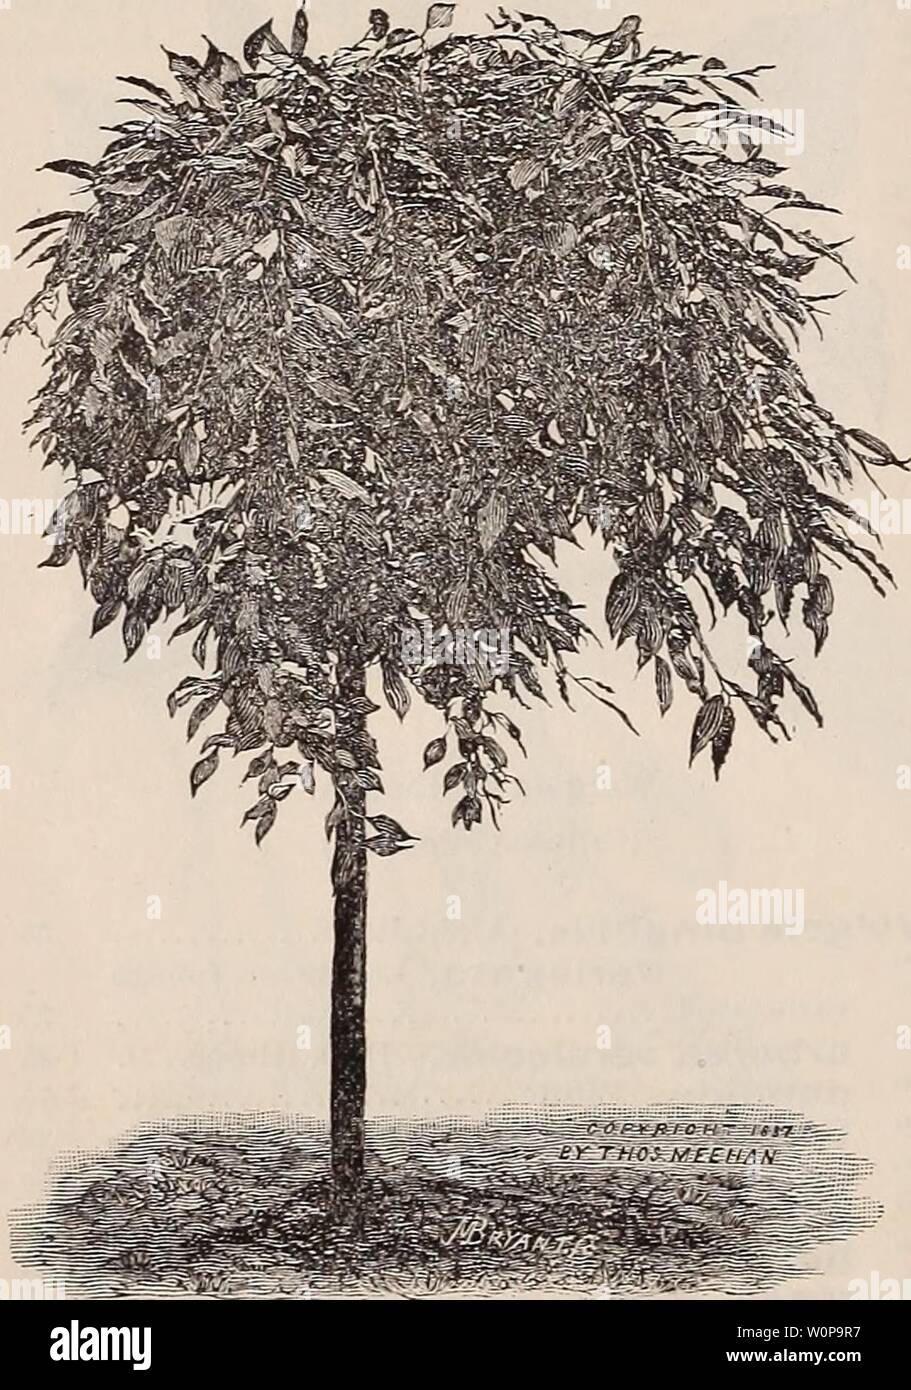 Archive image from page 27 of Descriptive catalogue of trees, shrubs,. Descriptive catalogue of trees, shrubs, vines and evergreens descriptivecatal1892thom Year: 1892  Weeping    Cerasus serotina pendula. (Weeping Wild Cherry.) Trees. Ash, Fraxinus excelsior pendula. Green barked SI 25 ' Fraxinus excelsior pendula aurea. Golden Barked SI 25 ' Fraxinus excelsior lenticifolia pen- dula SI 25 These form wide heads, in time allowing of the use of seats under them if desired, or they can be pruned to form more compact tops. Beech, Fagus sylvatica pendula Si oo This has the shining green leaves of Stock Photo